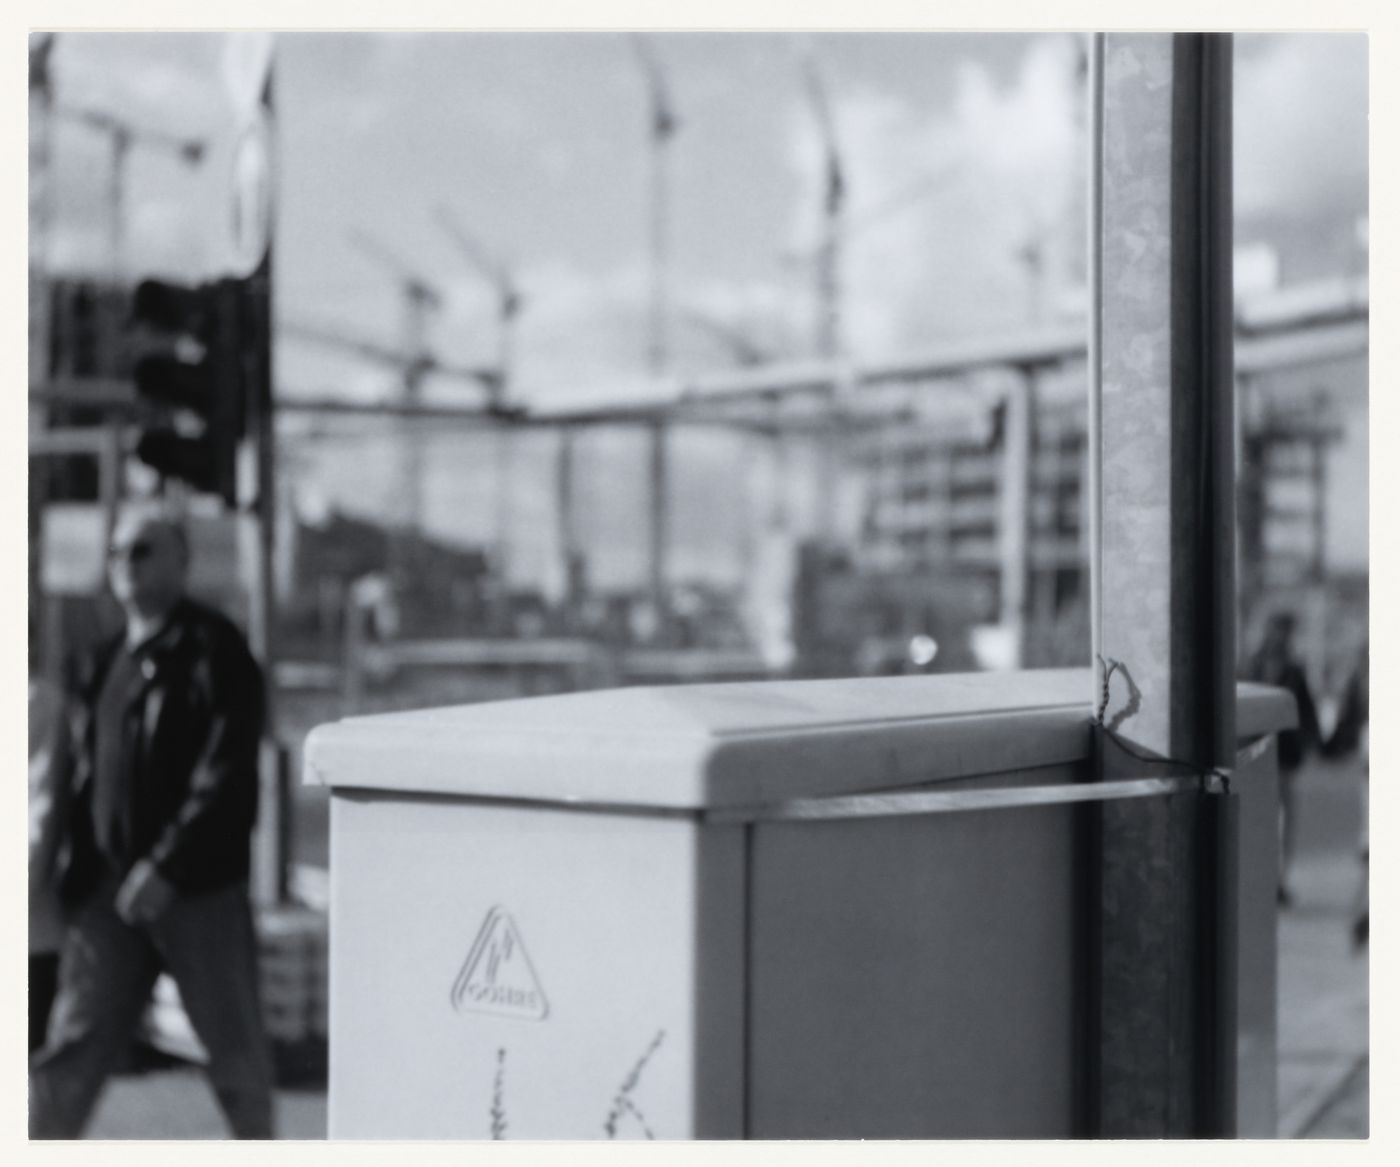 View of an electrical box, post, and a man showing building sites in the background, Berlin, Germany, from the artist book "The Potsdamer Project"